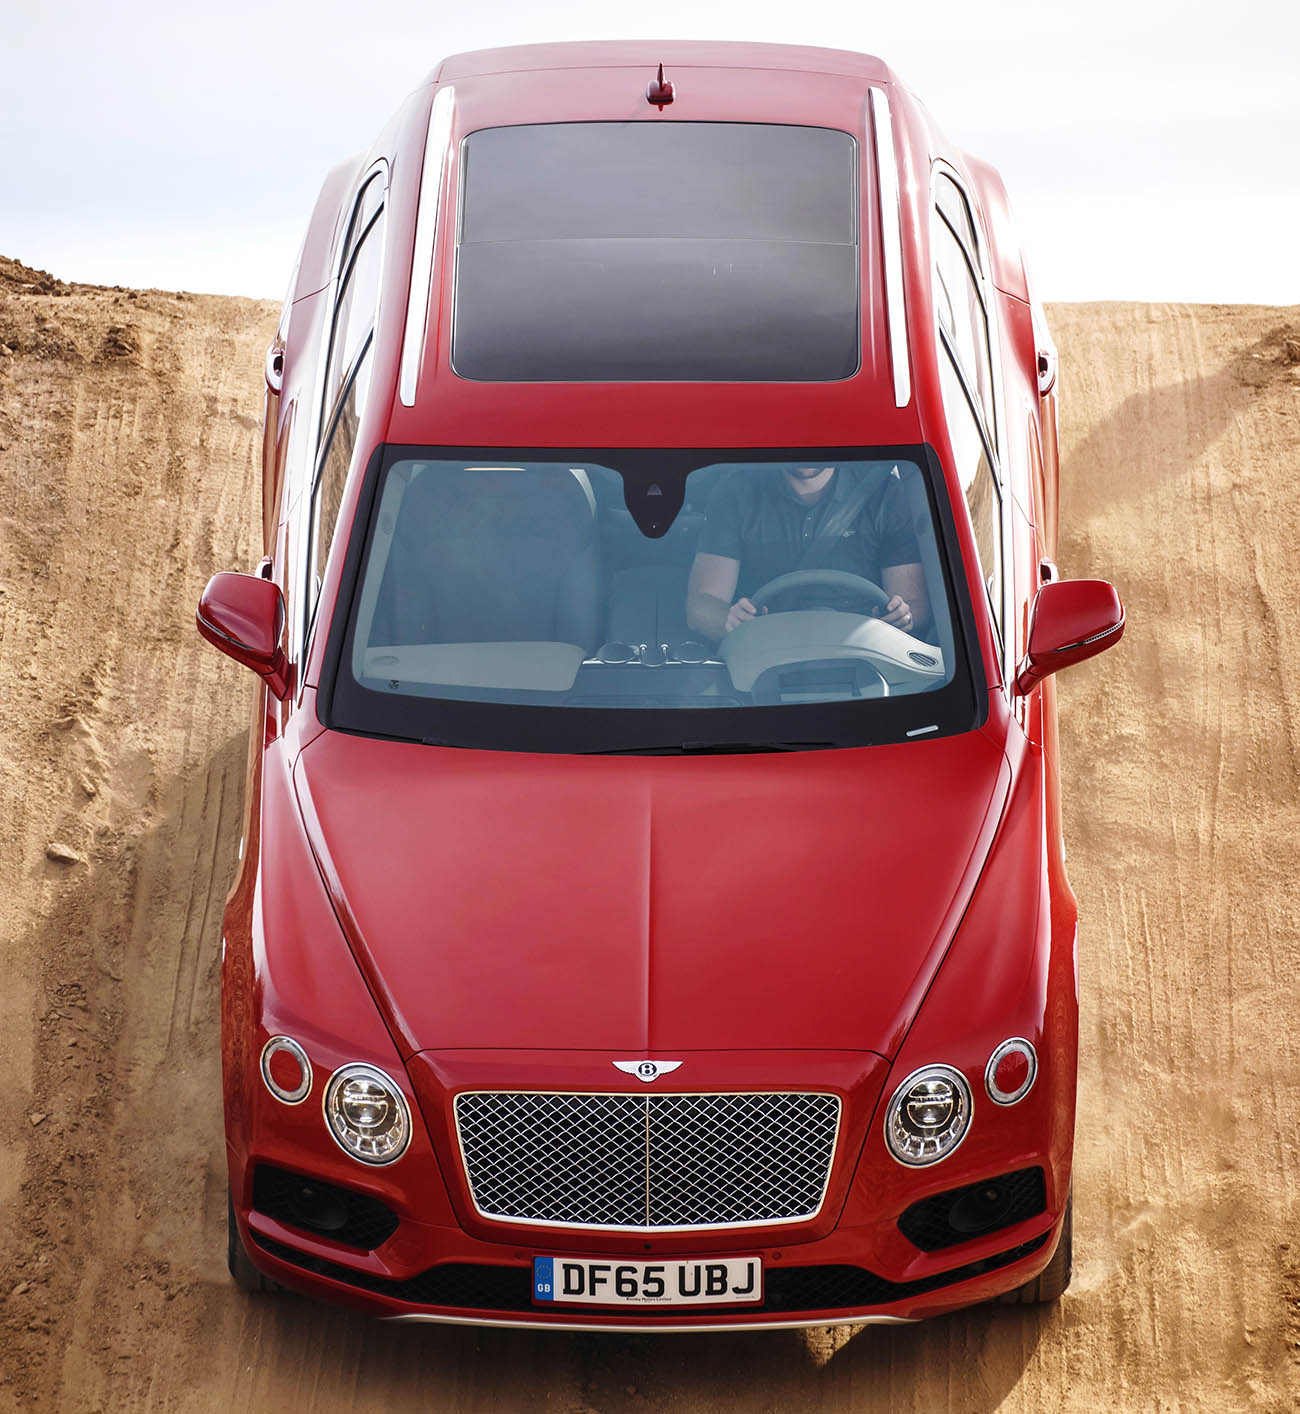 Bentley Bentayga named 'SUV of the Year' in Robb Report Best of the Bes2t Awards